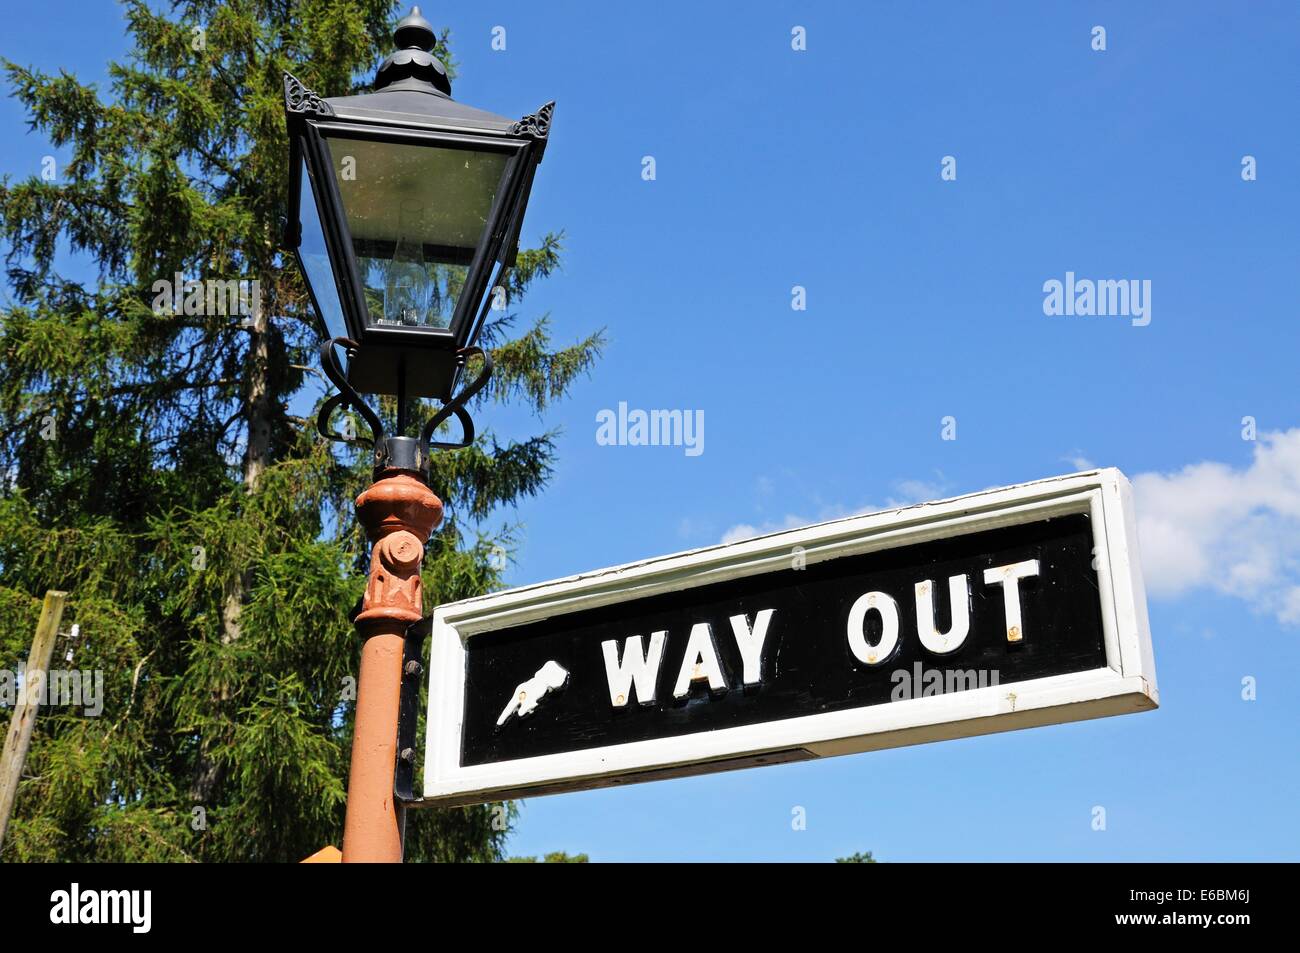 Old Retro way out sign attached to a lamppost, Severn Valley Railway, Arley, Worcestershire, England, UK, Western Europe. Stock Photo